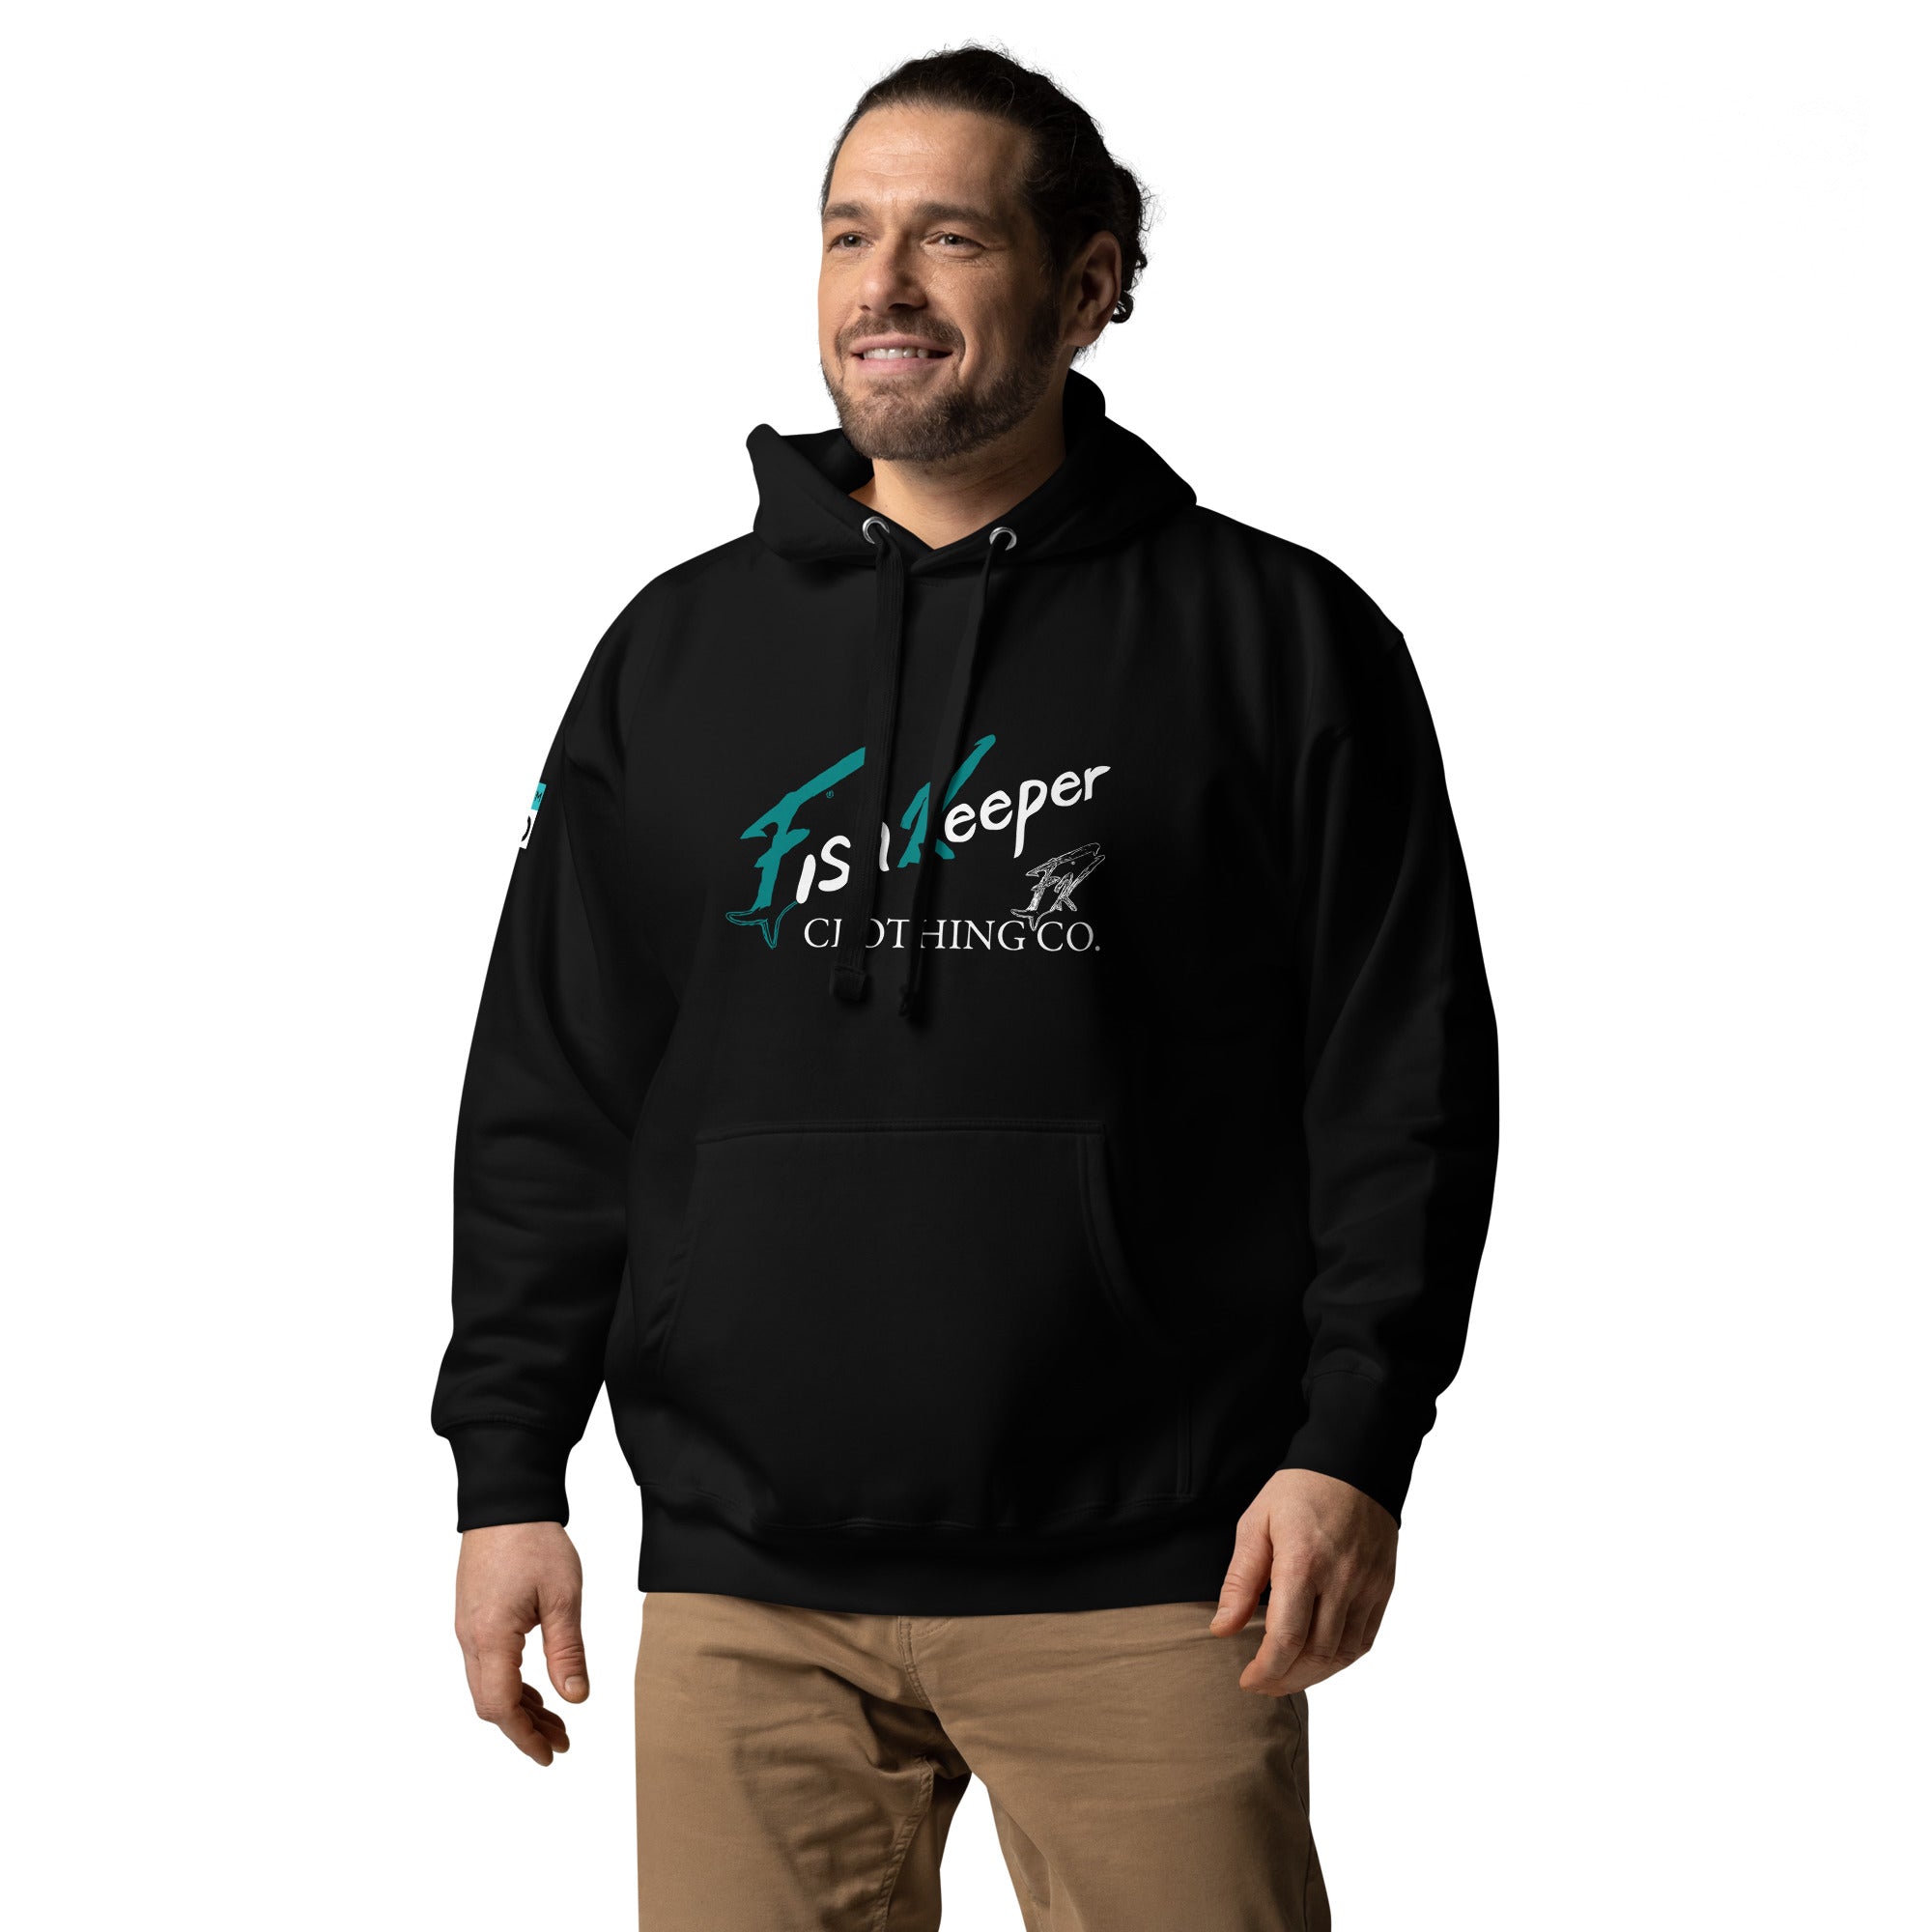 Fishkeeper Clothing Co V2 Unisex Hoodie *Support Our Mission